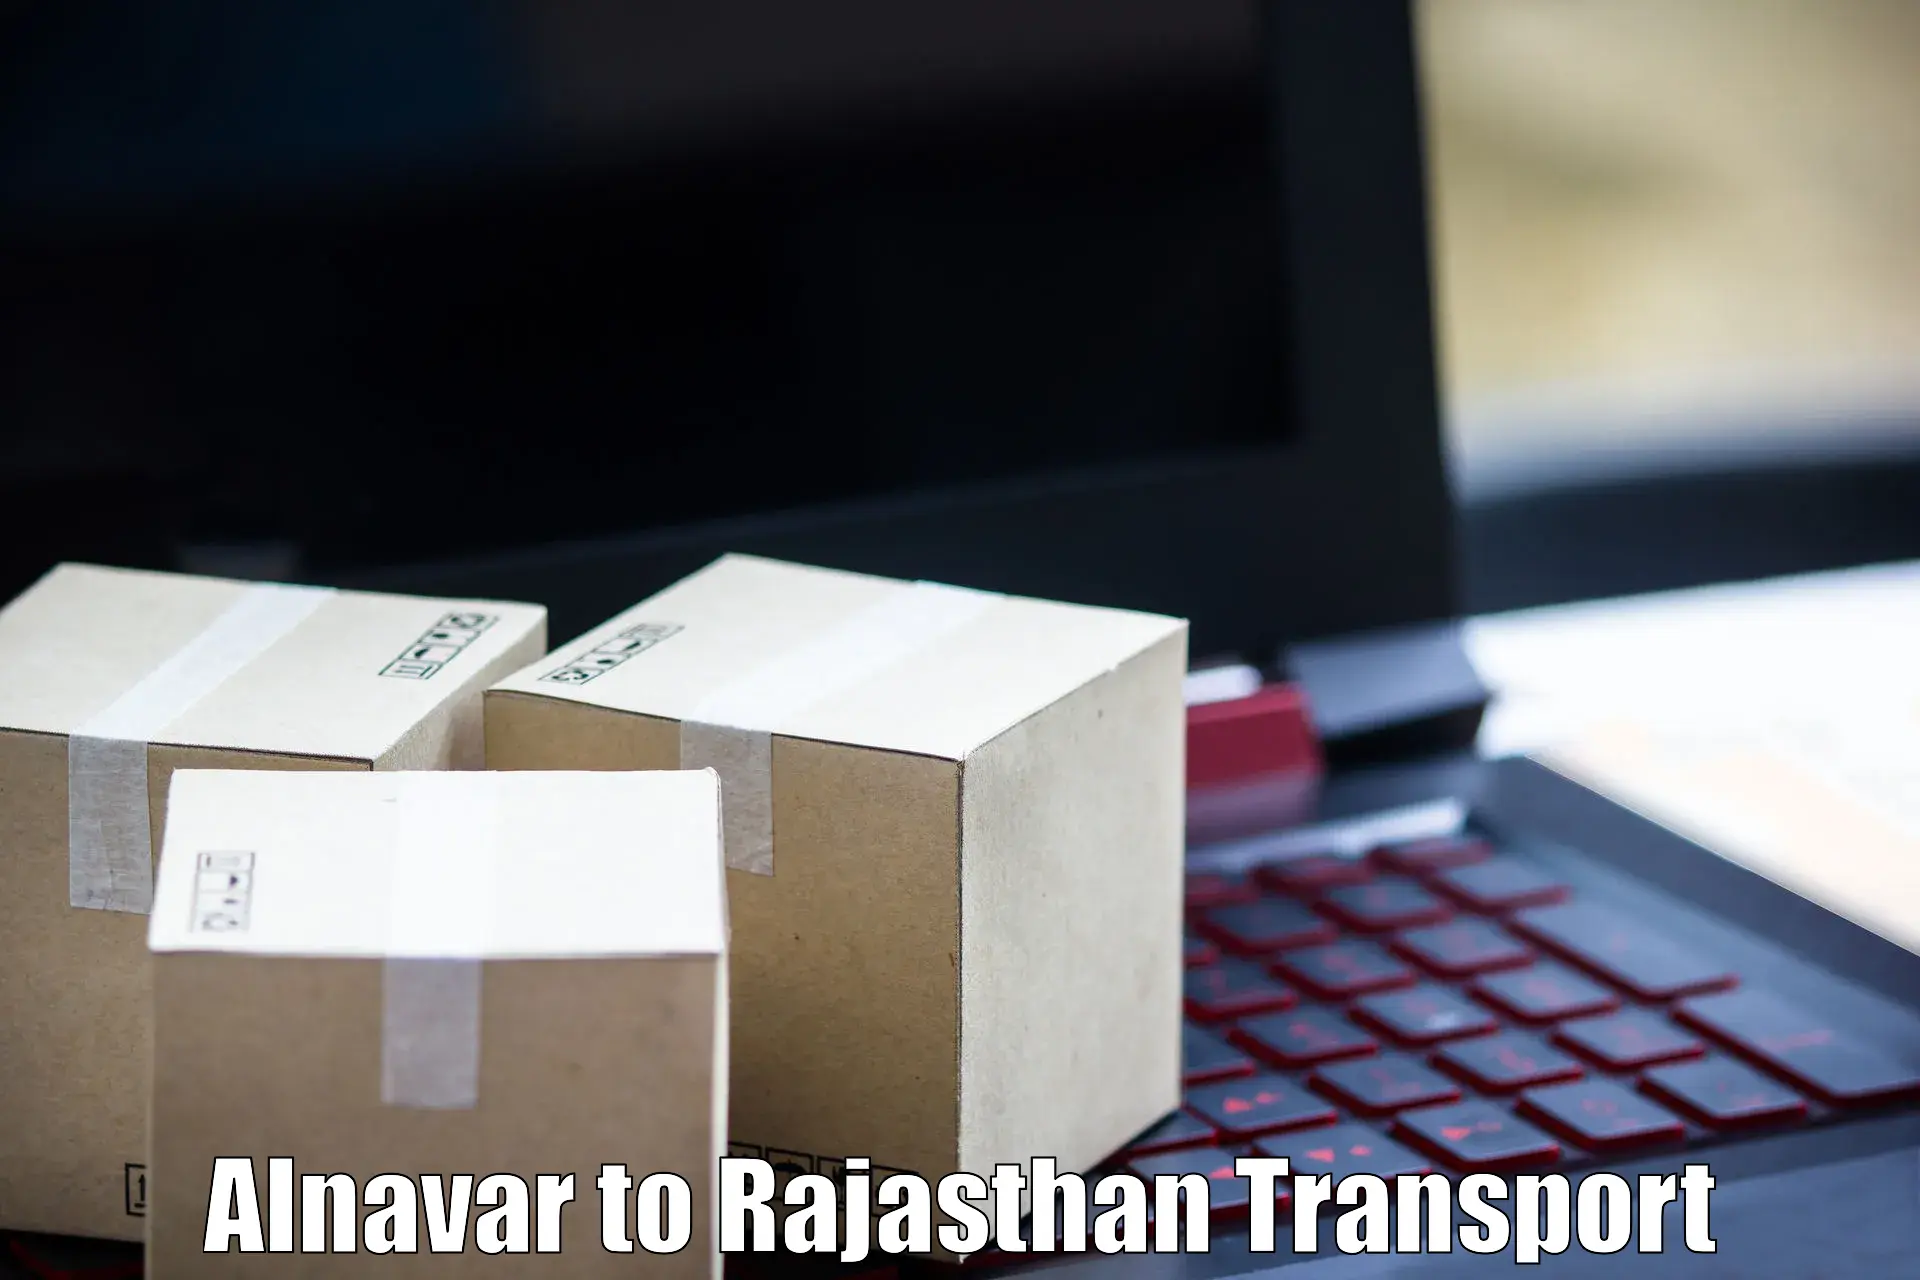 Truck transport companies in India Alnavar to Mathania